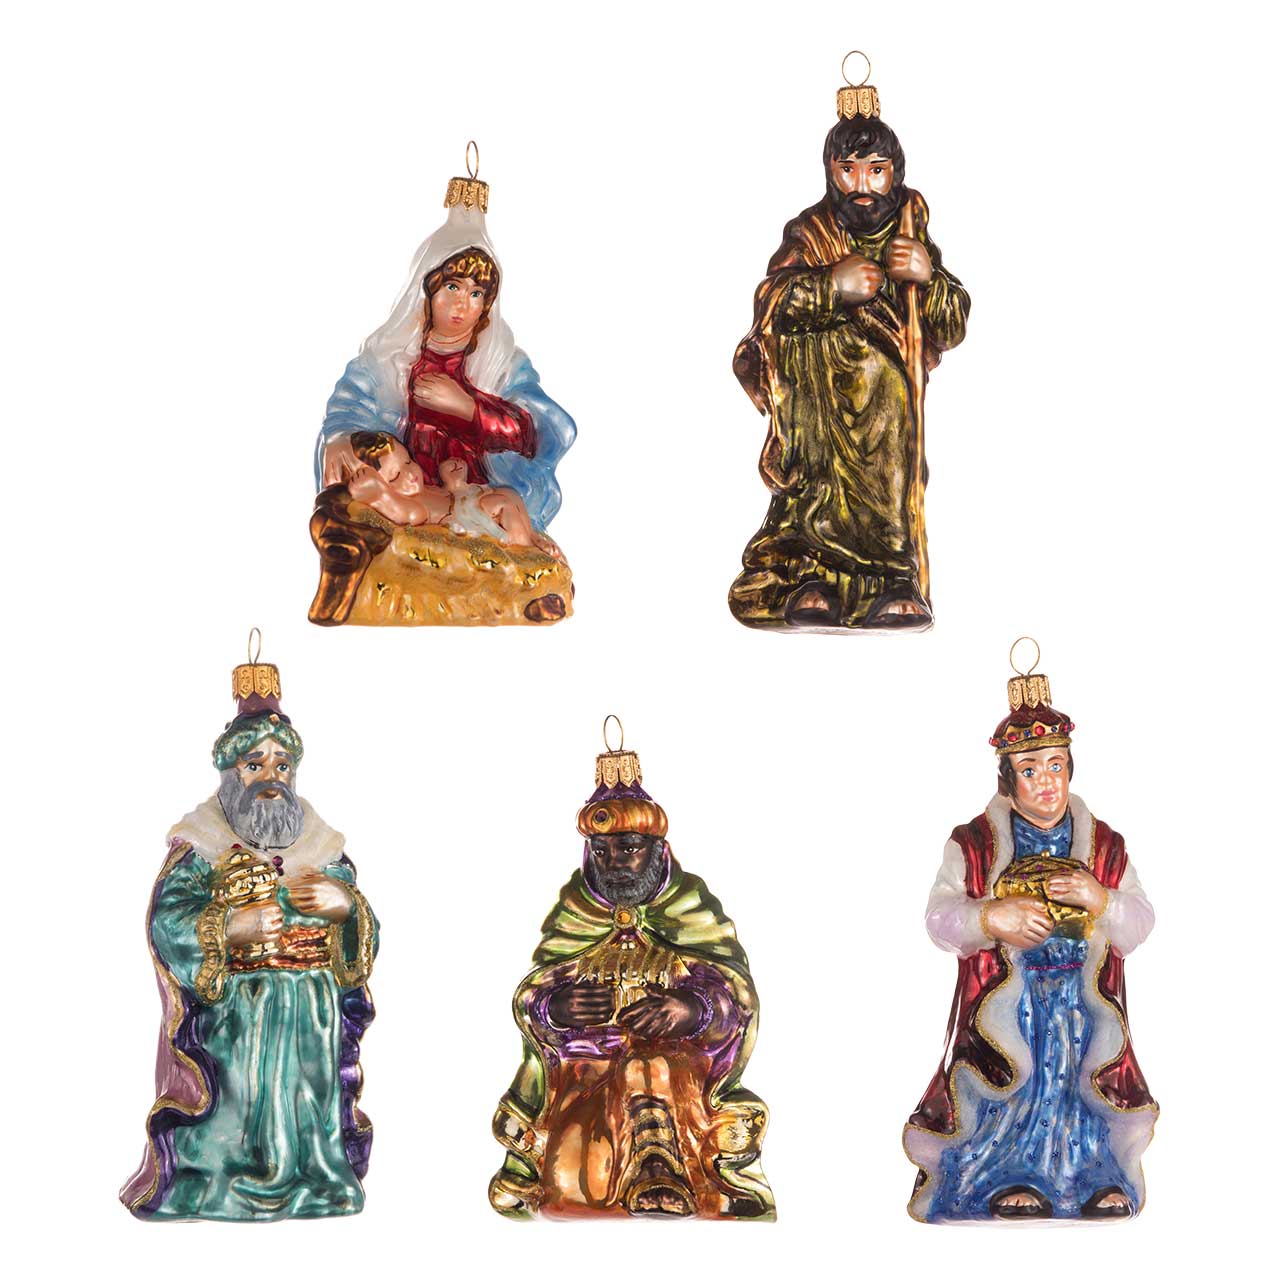 Nativity set - collector's edition